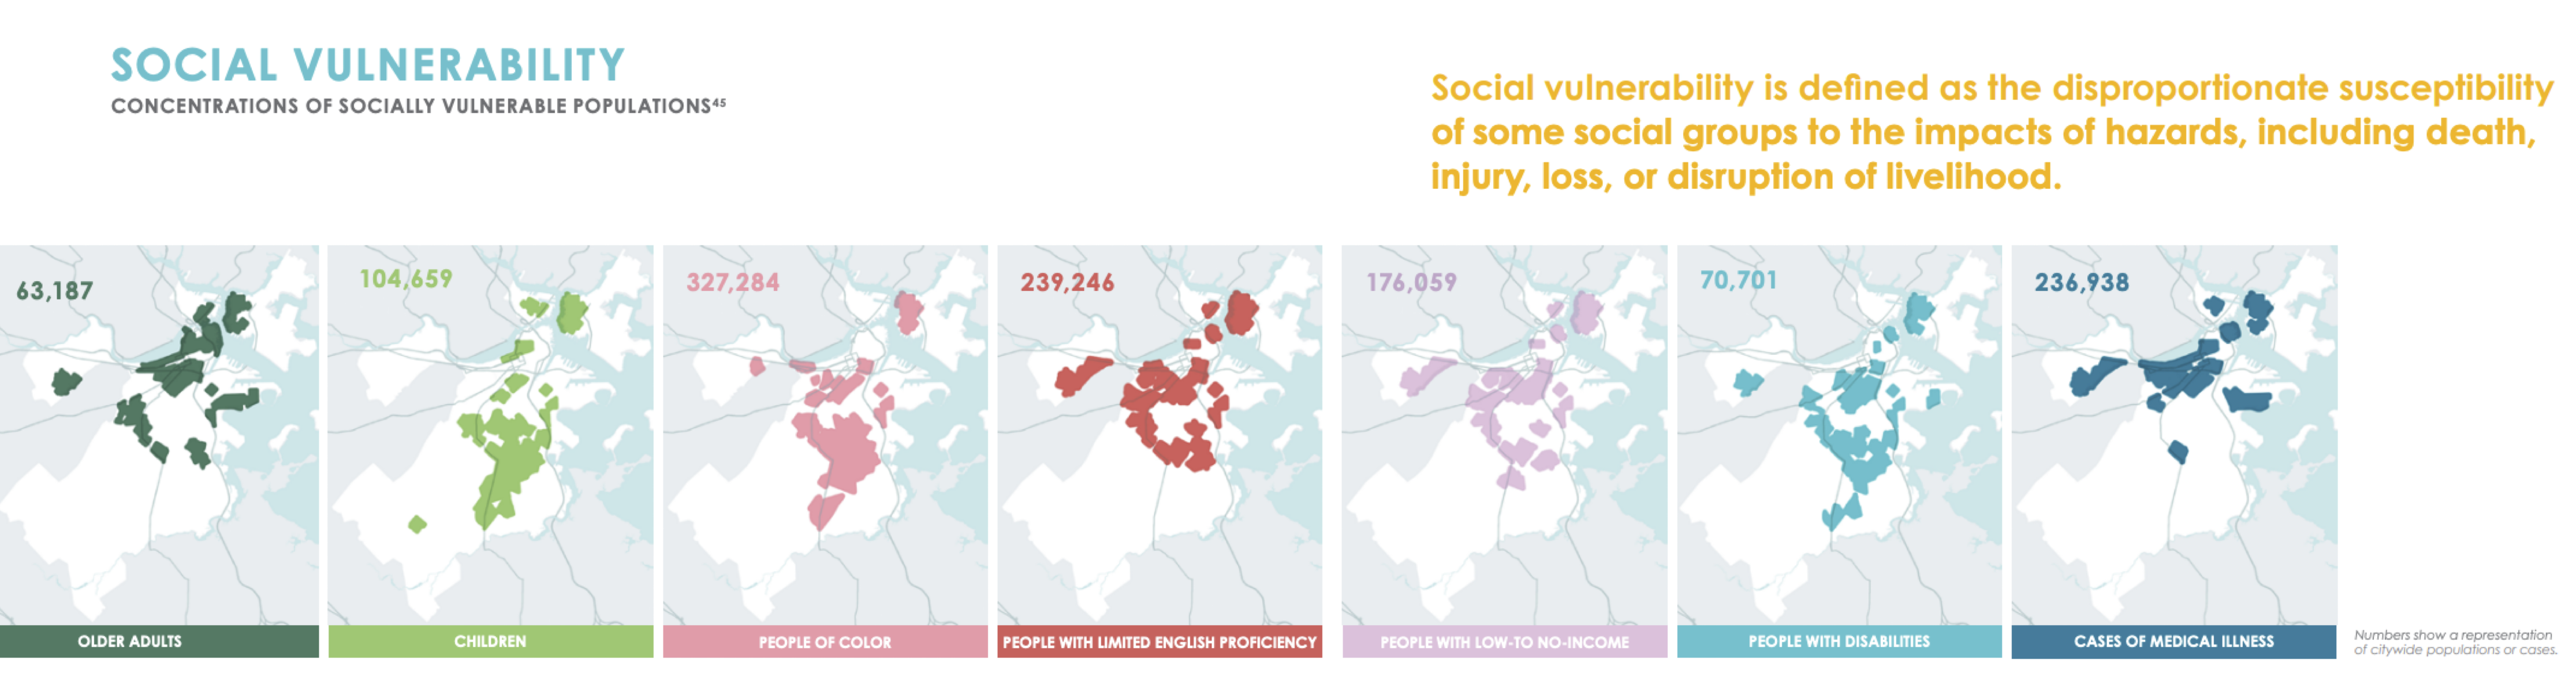 A screenshot from the Social Vulnerability section of the Climate Ready Boston report (pg. 30)